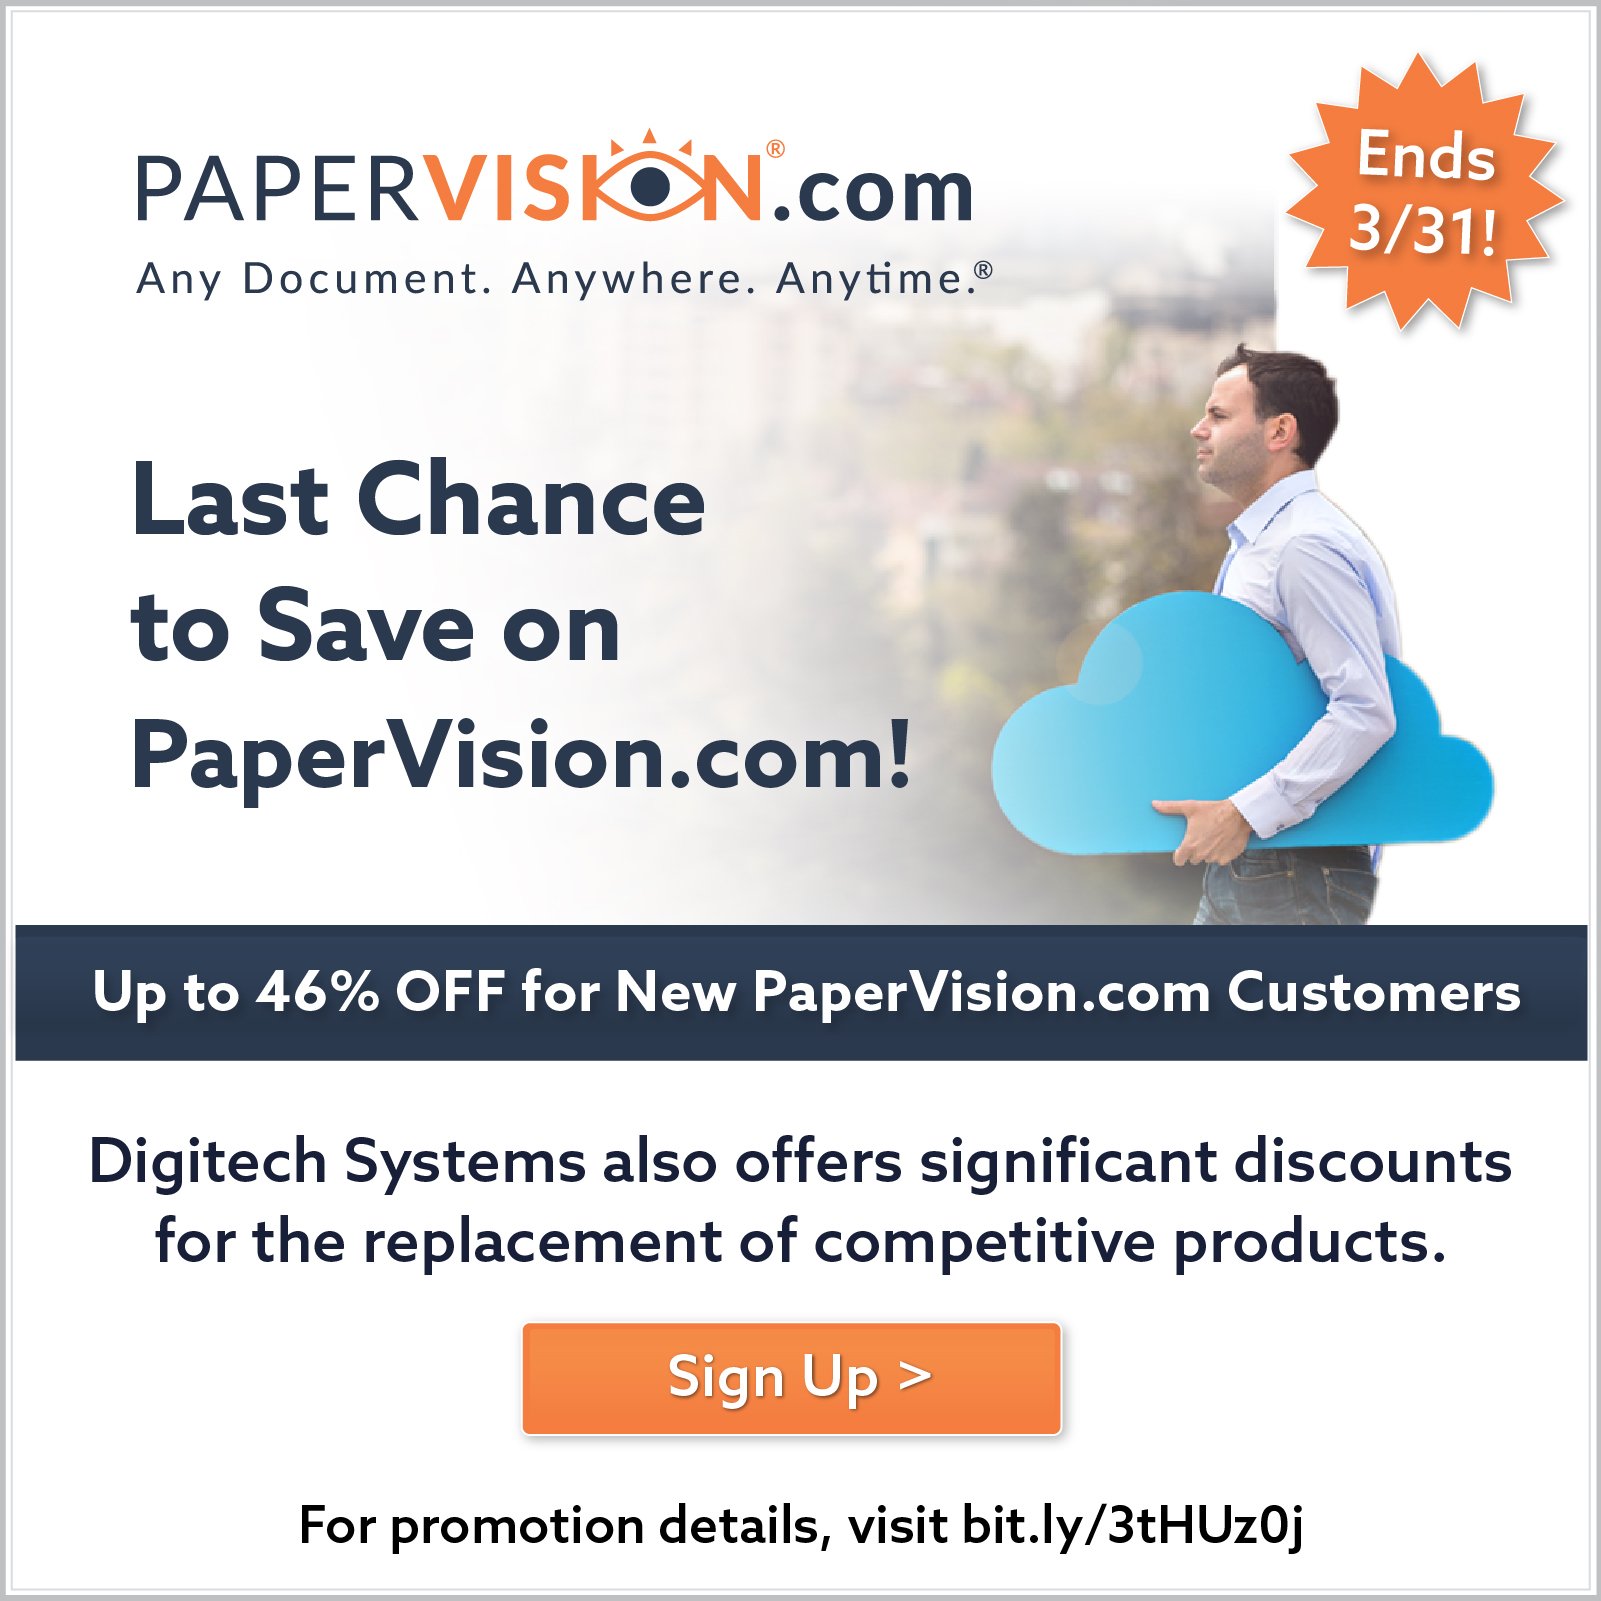 Last Chance to Save on PVcom